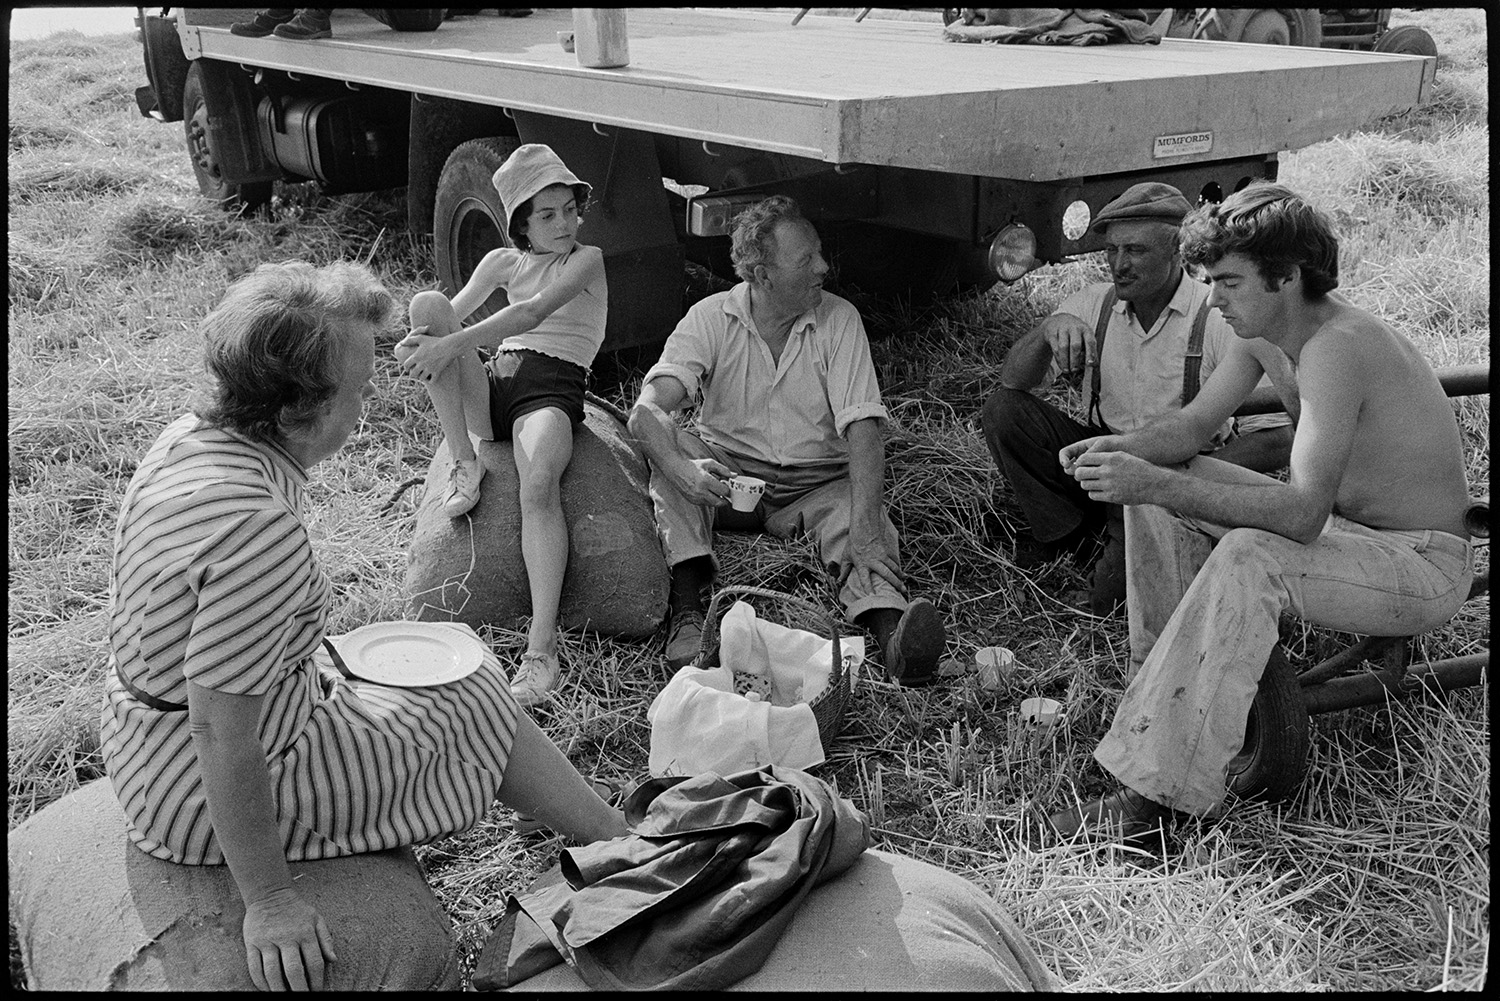 Harvesters tea break in field. 
[The Ward family having a tea break whilst harvesting in a field at Parsonage, Iddesleigh. Hettie Ward and a girl at sat on hessian sacks. John ward is sat on the ground with two other men.]